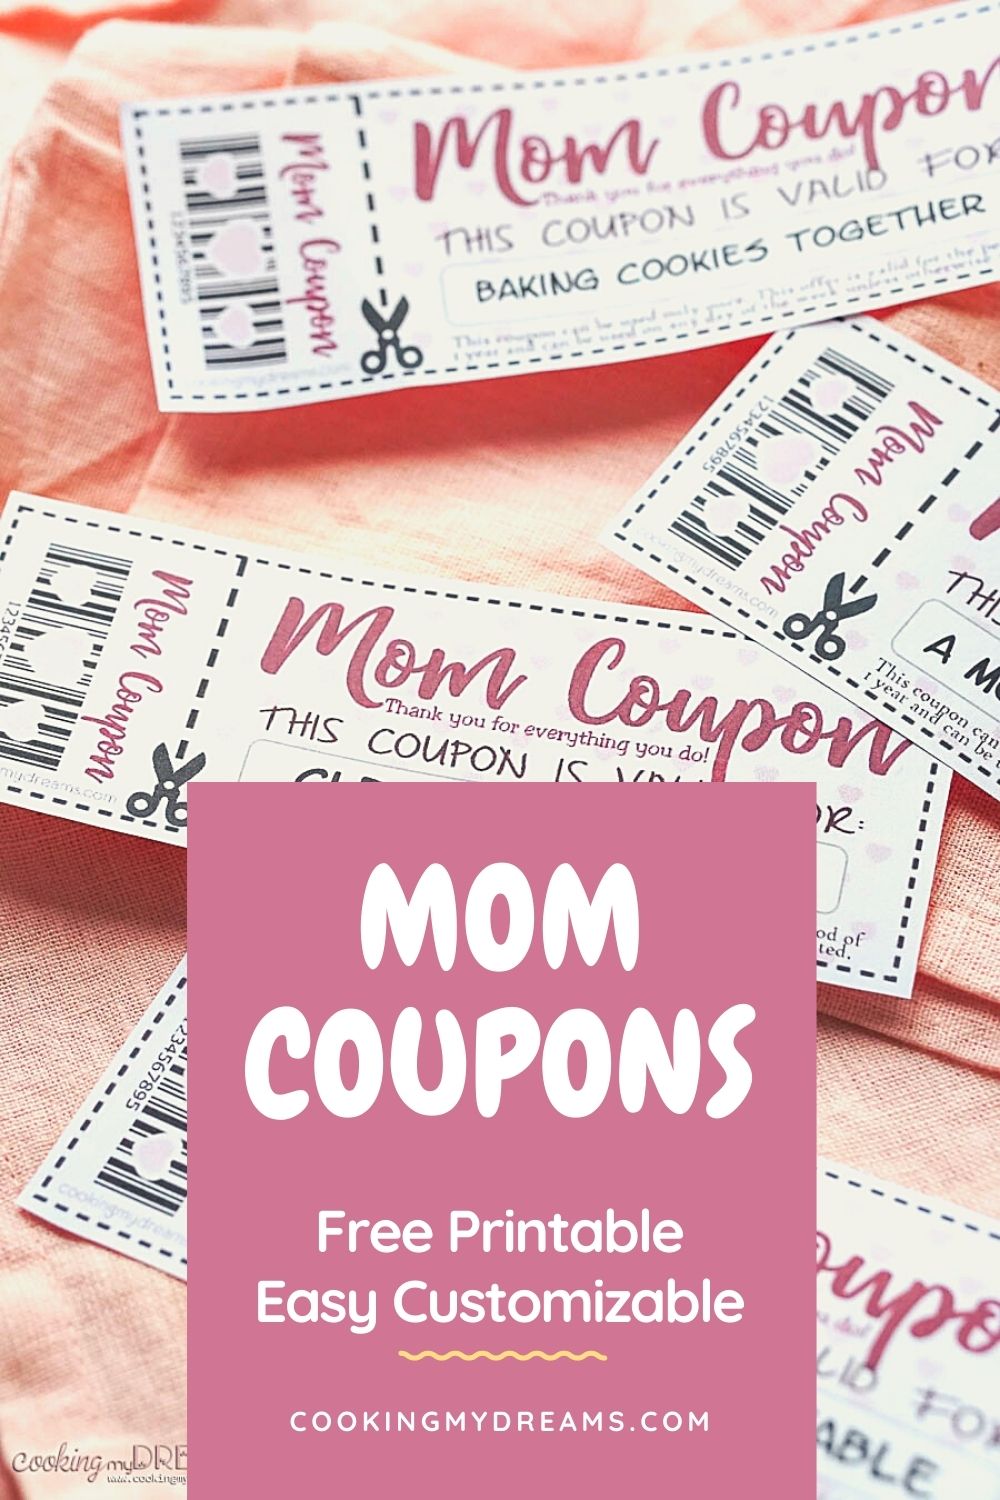 printable-mom-coupons-easy-customizable-mother-s-day-gift-cooking